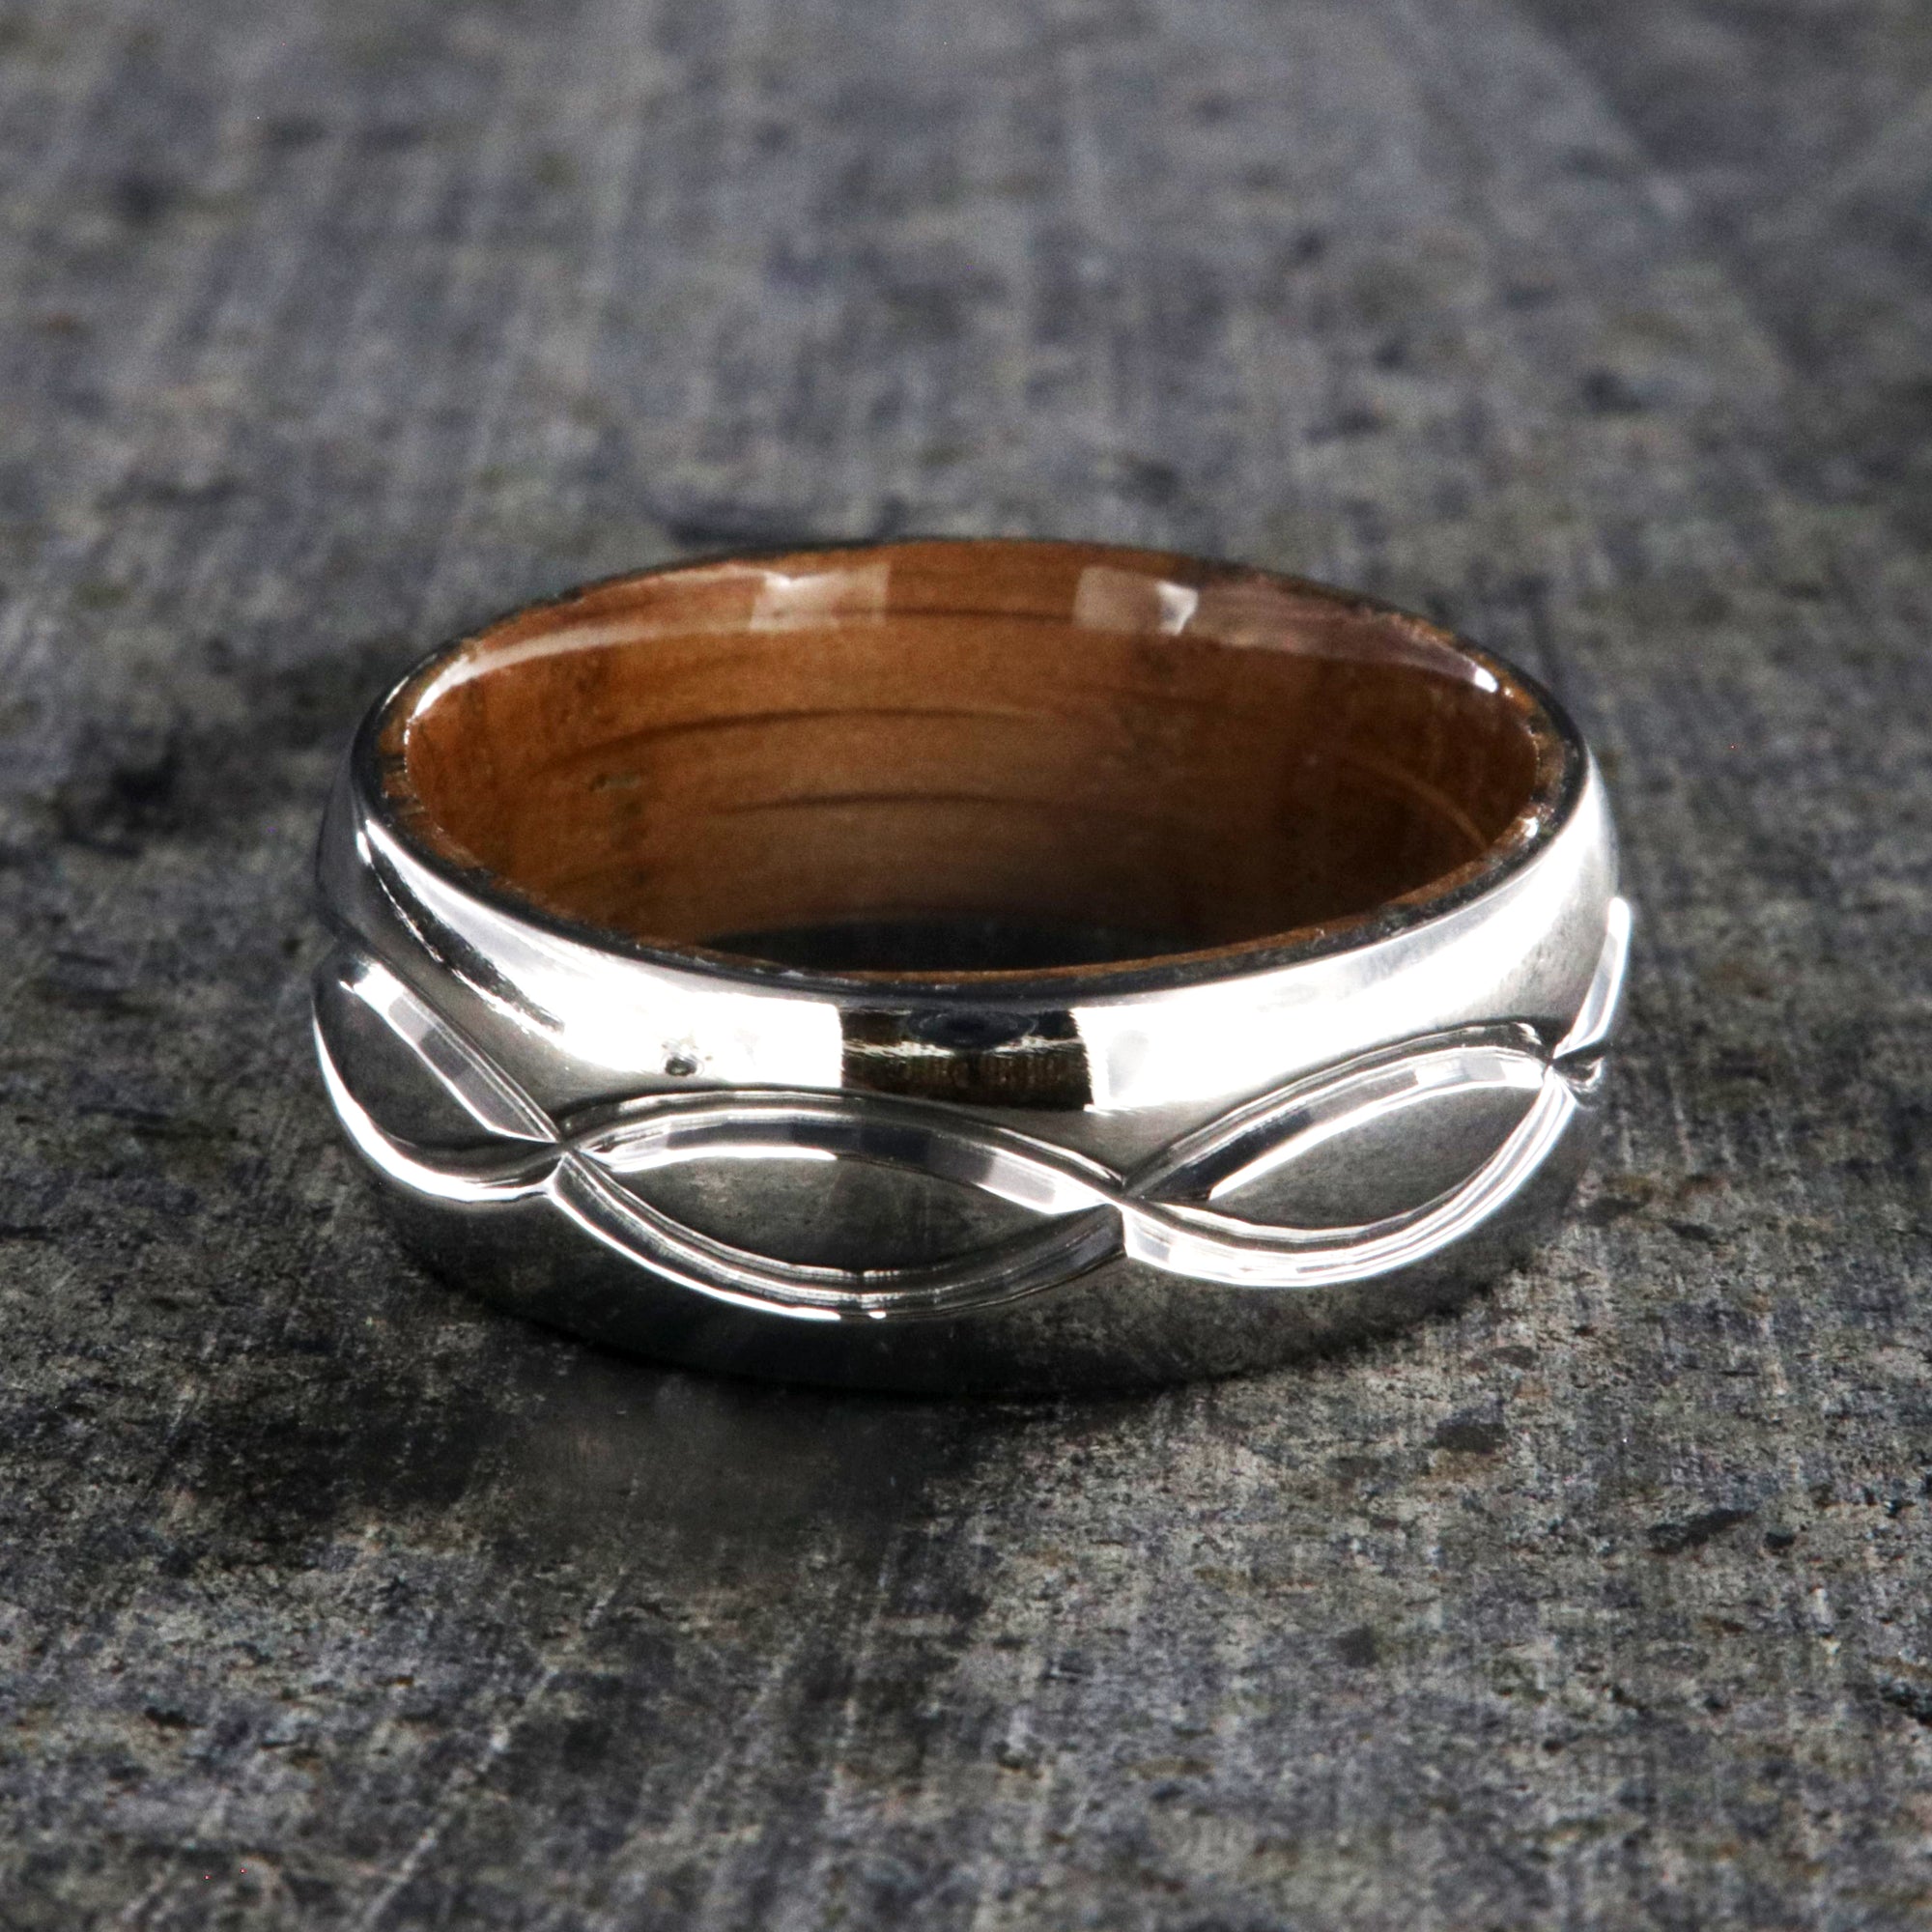 8mm wide titanium wedding band with a milled infinity design with a whiskey barrel sleeve